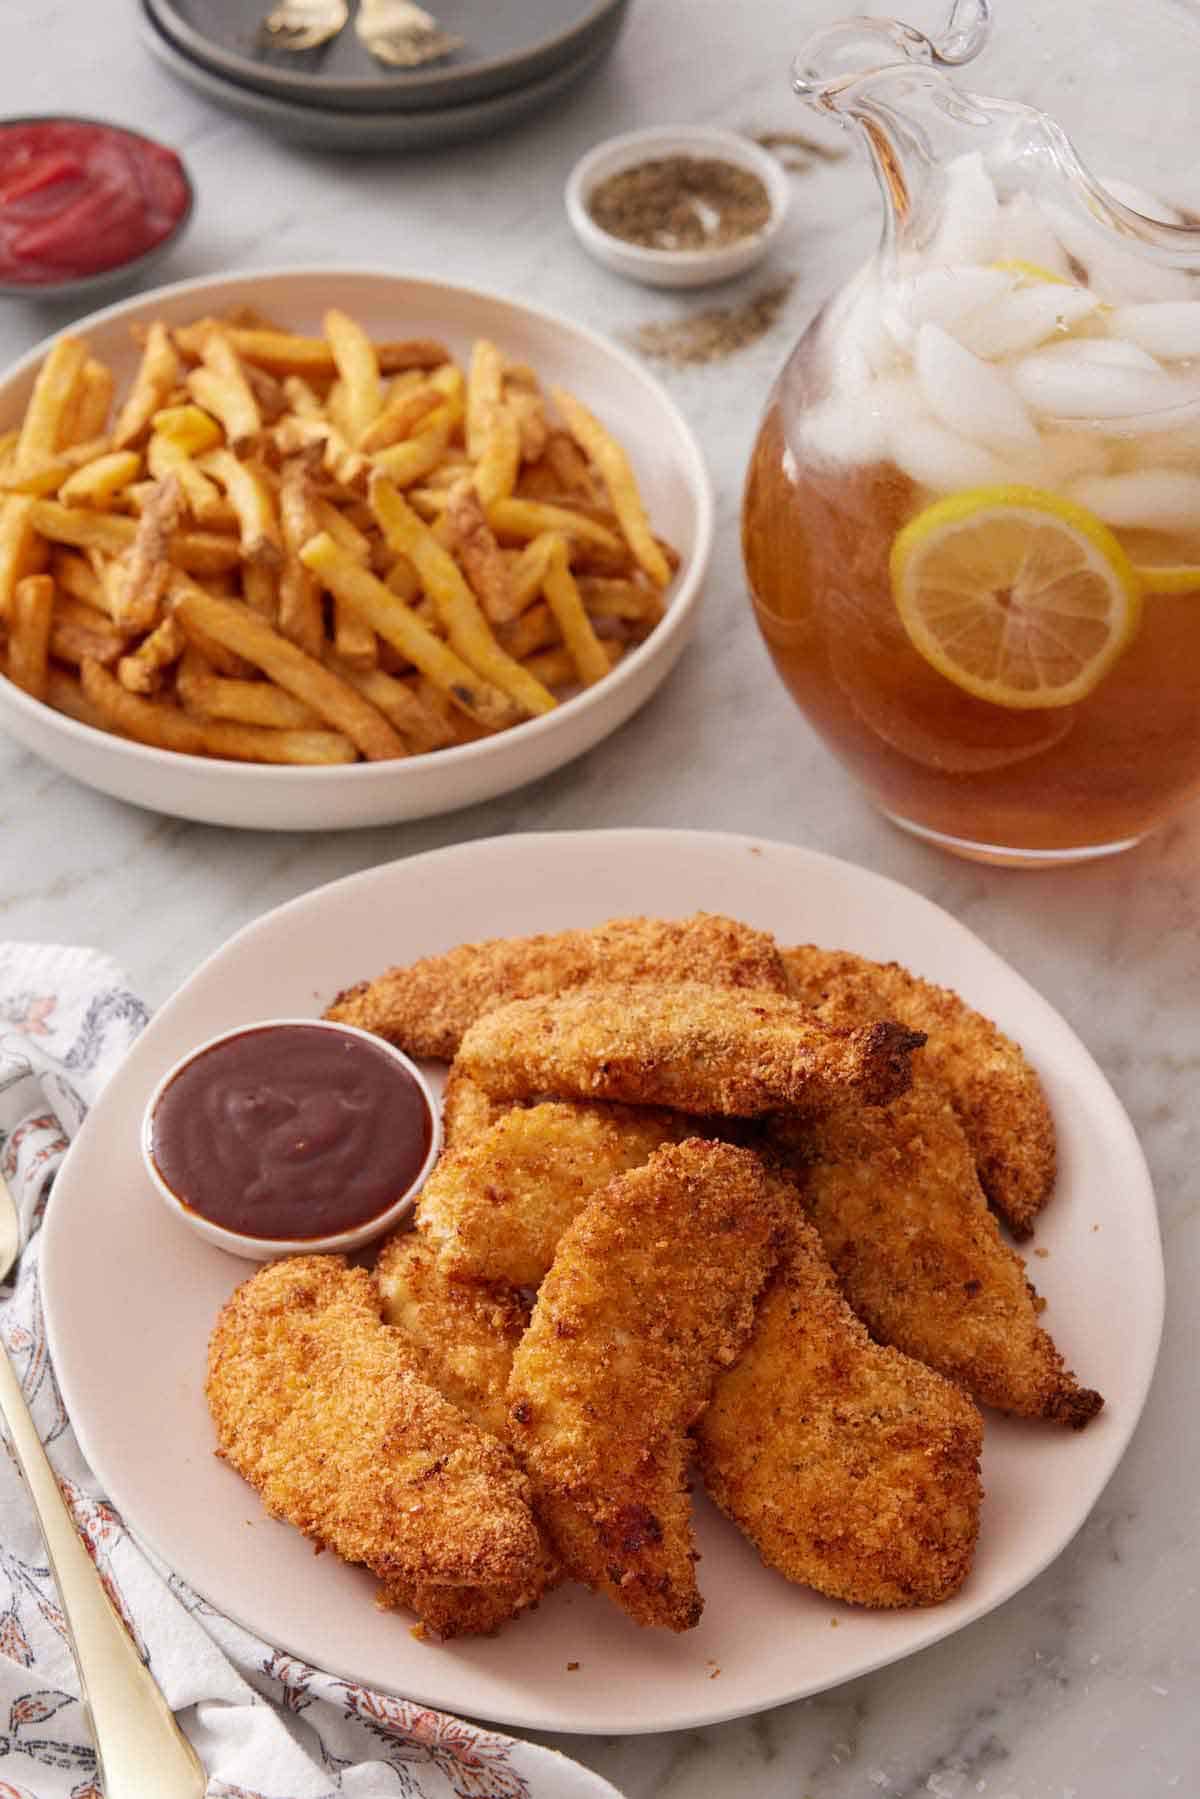 A plate of air fryer chicken tenders with a small bowl of bbq sauce. A bowl of french fries and a pitcher of iced tea in the background.